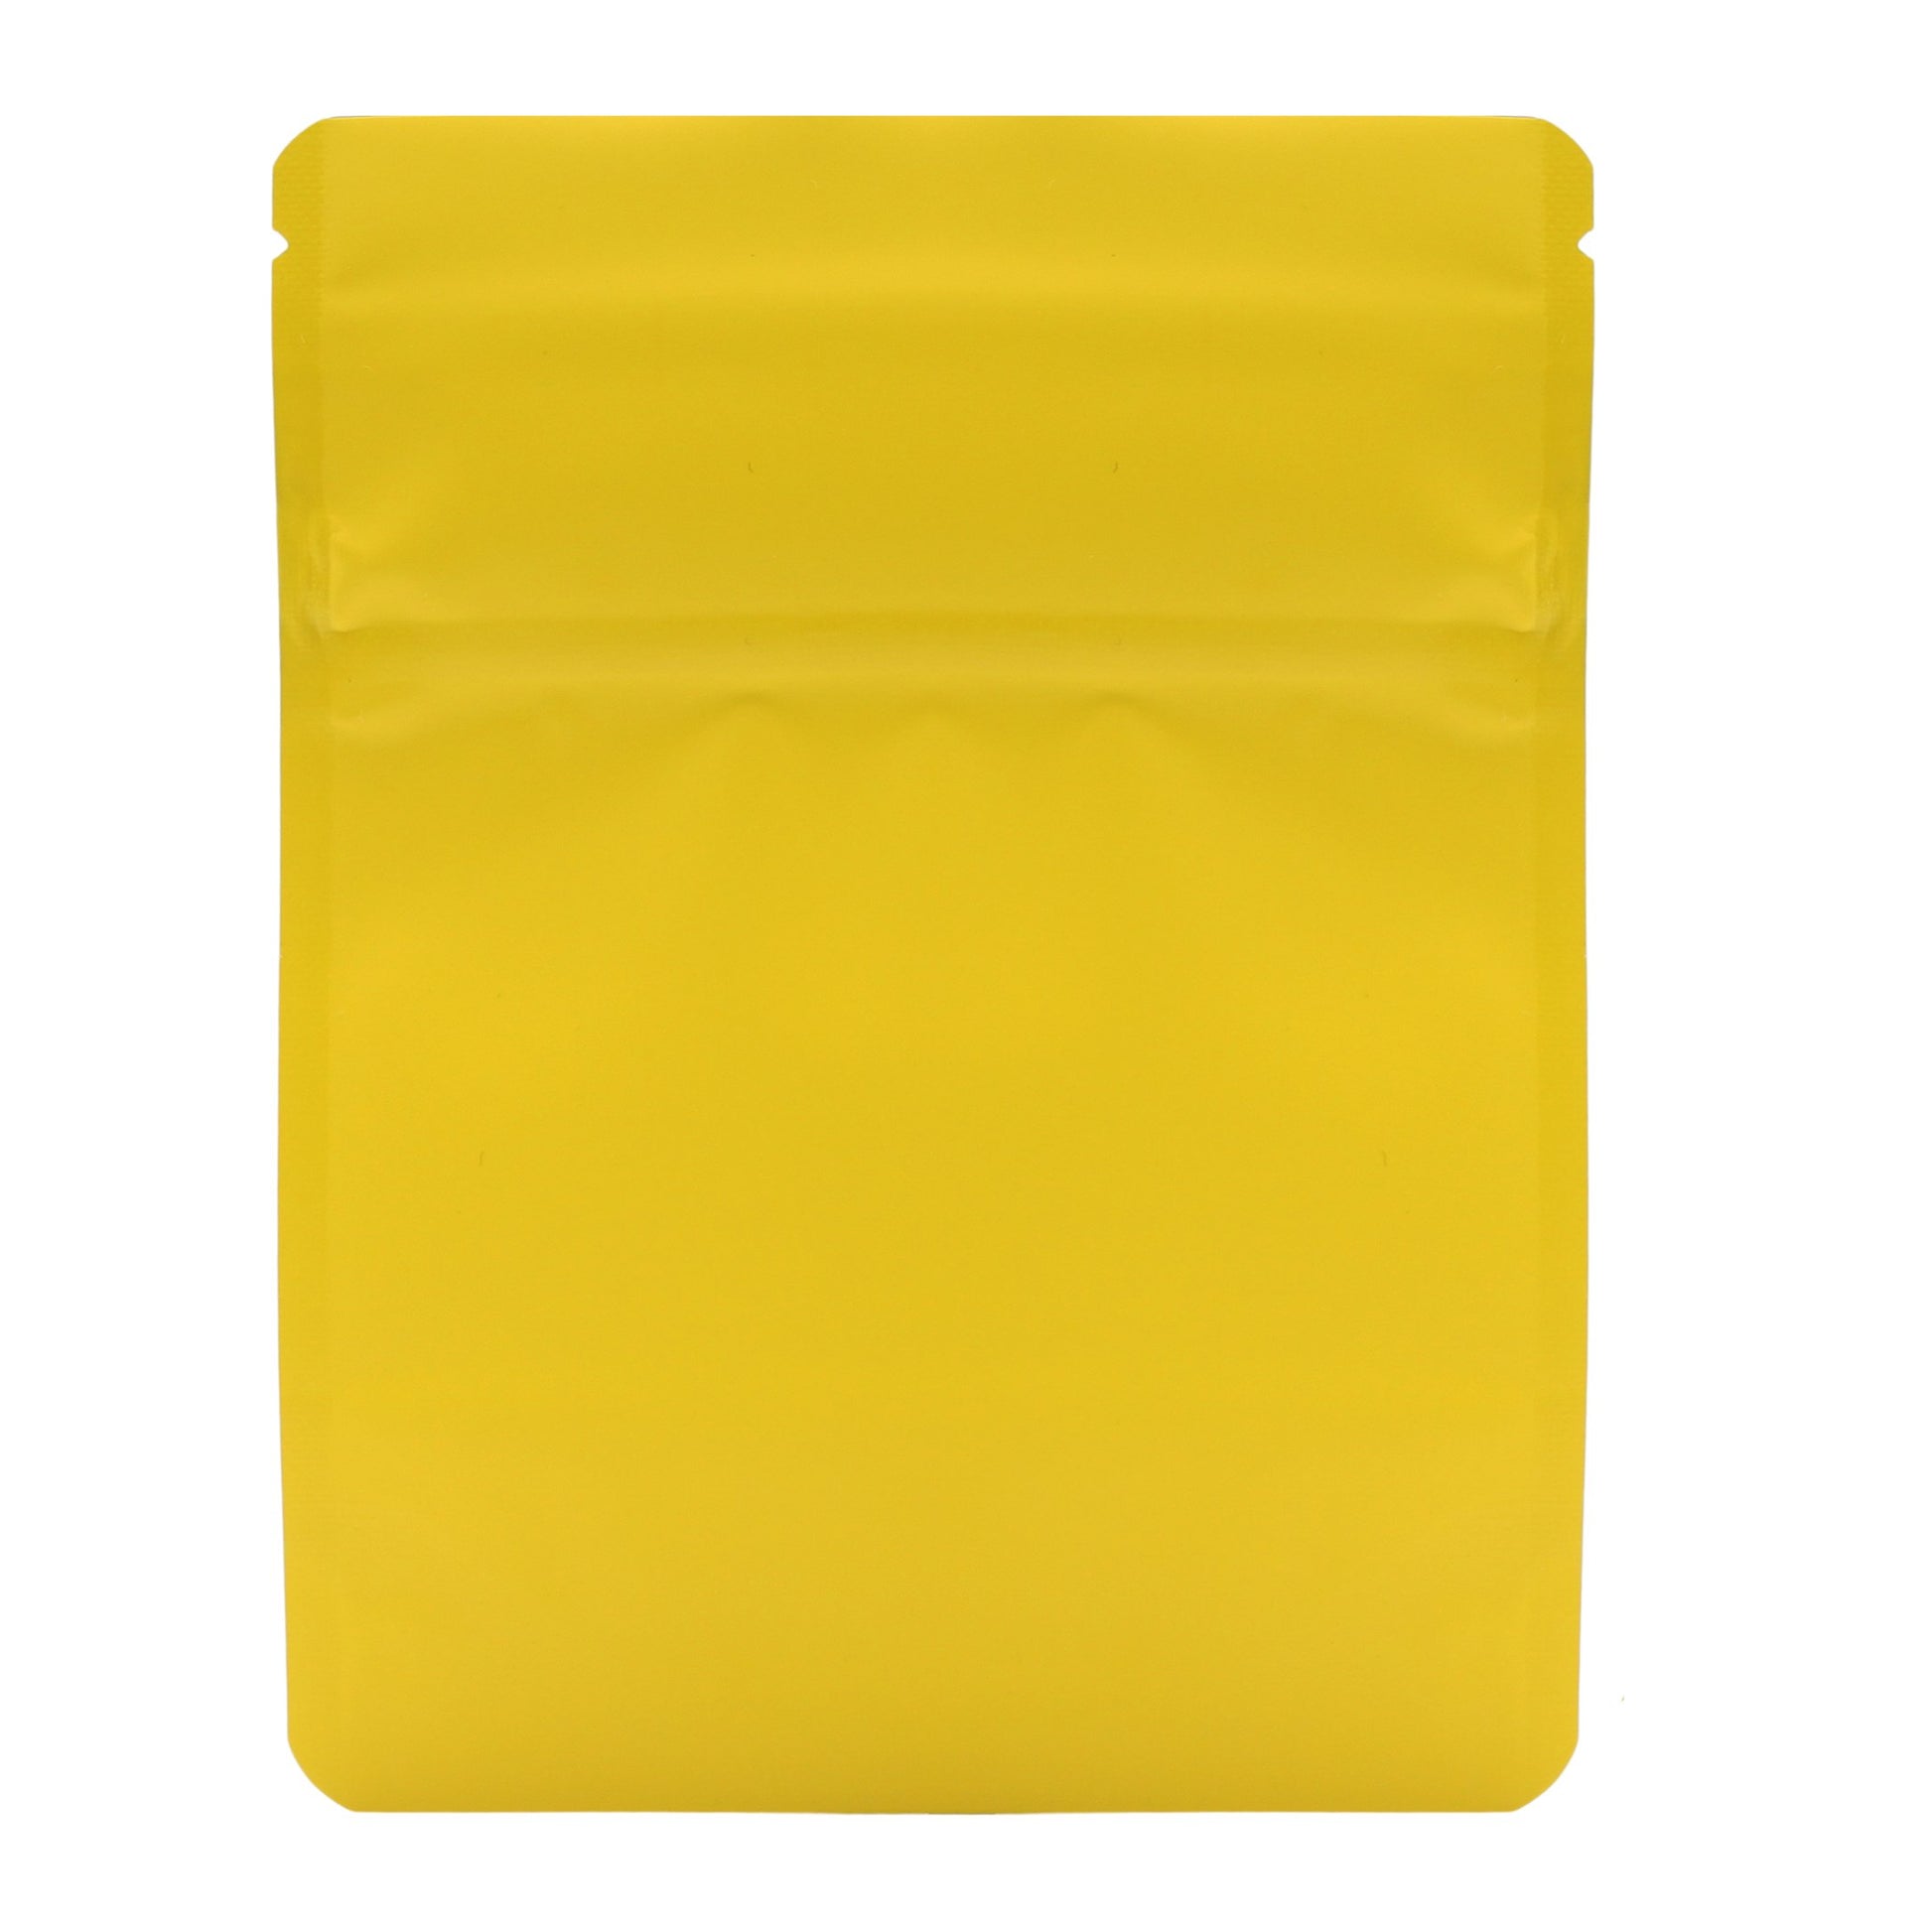 Bag King Child-Resistant Opaque Wide Mouth Bag (1/8th oz) 3.9"x4.9" Matte Yellow